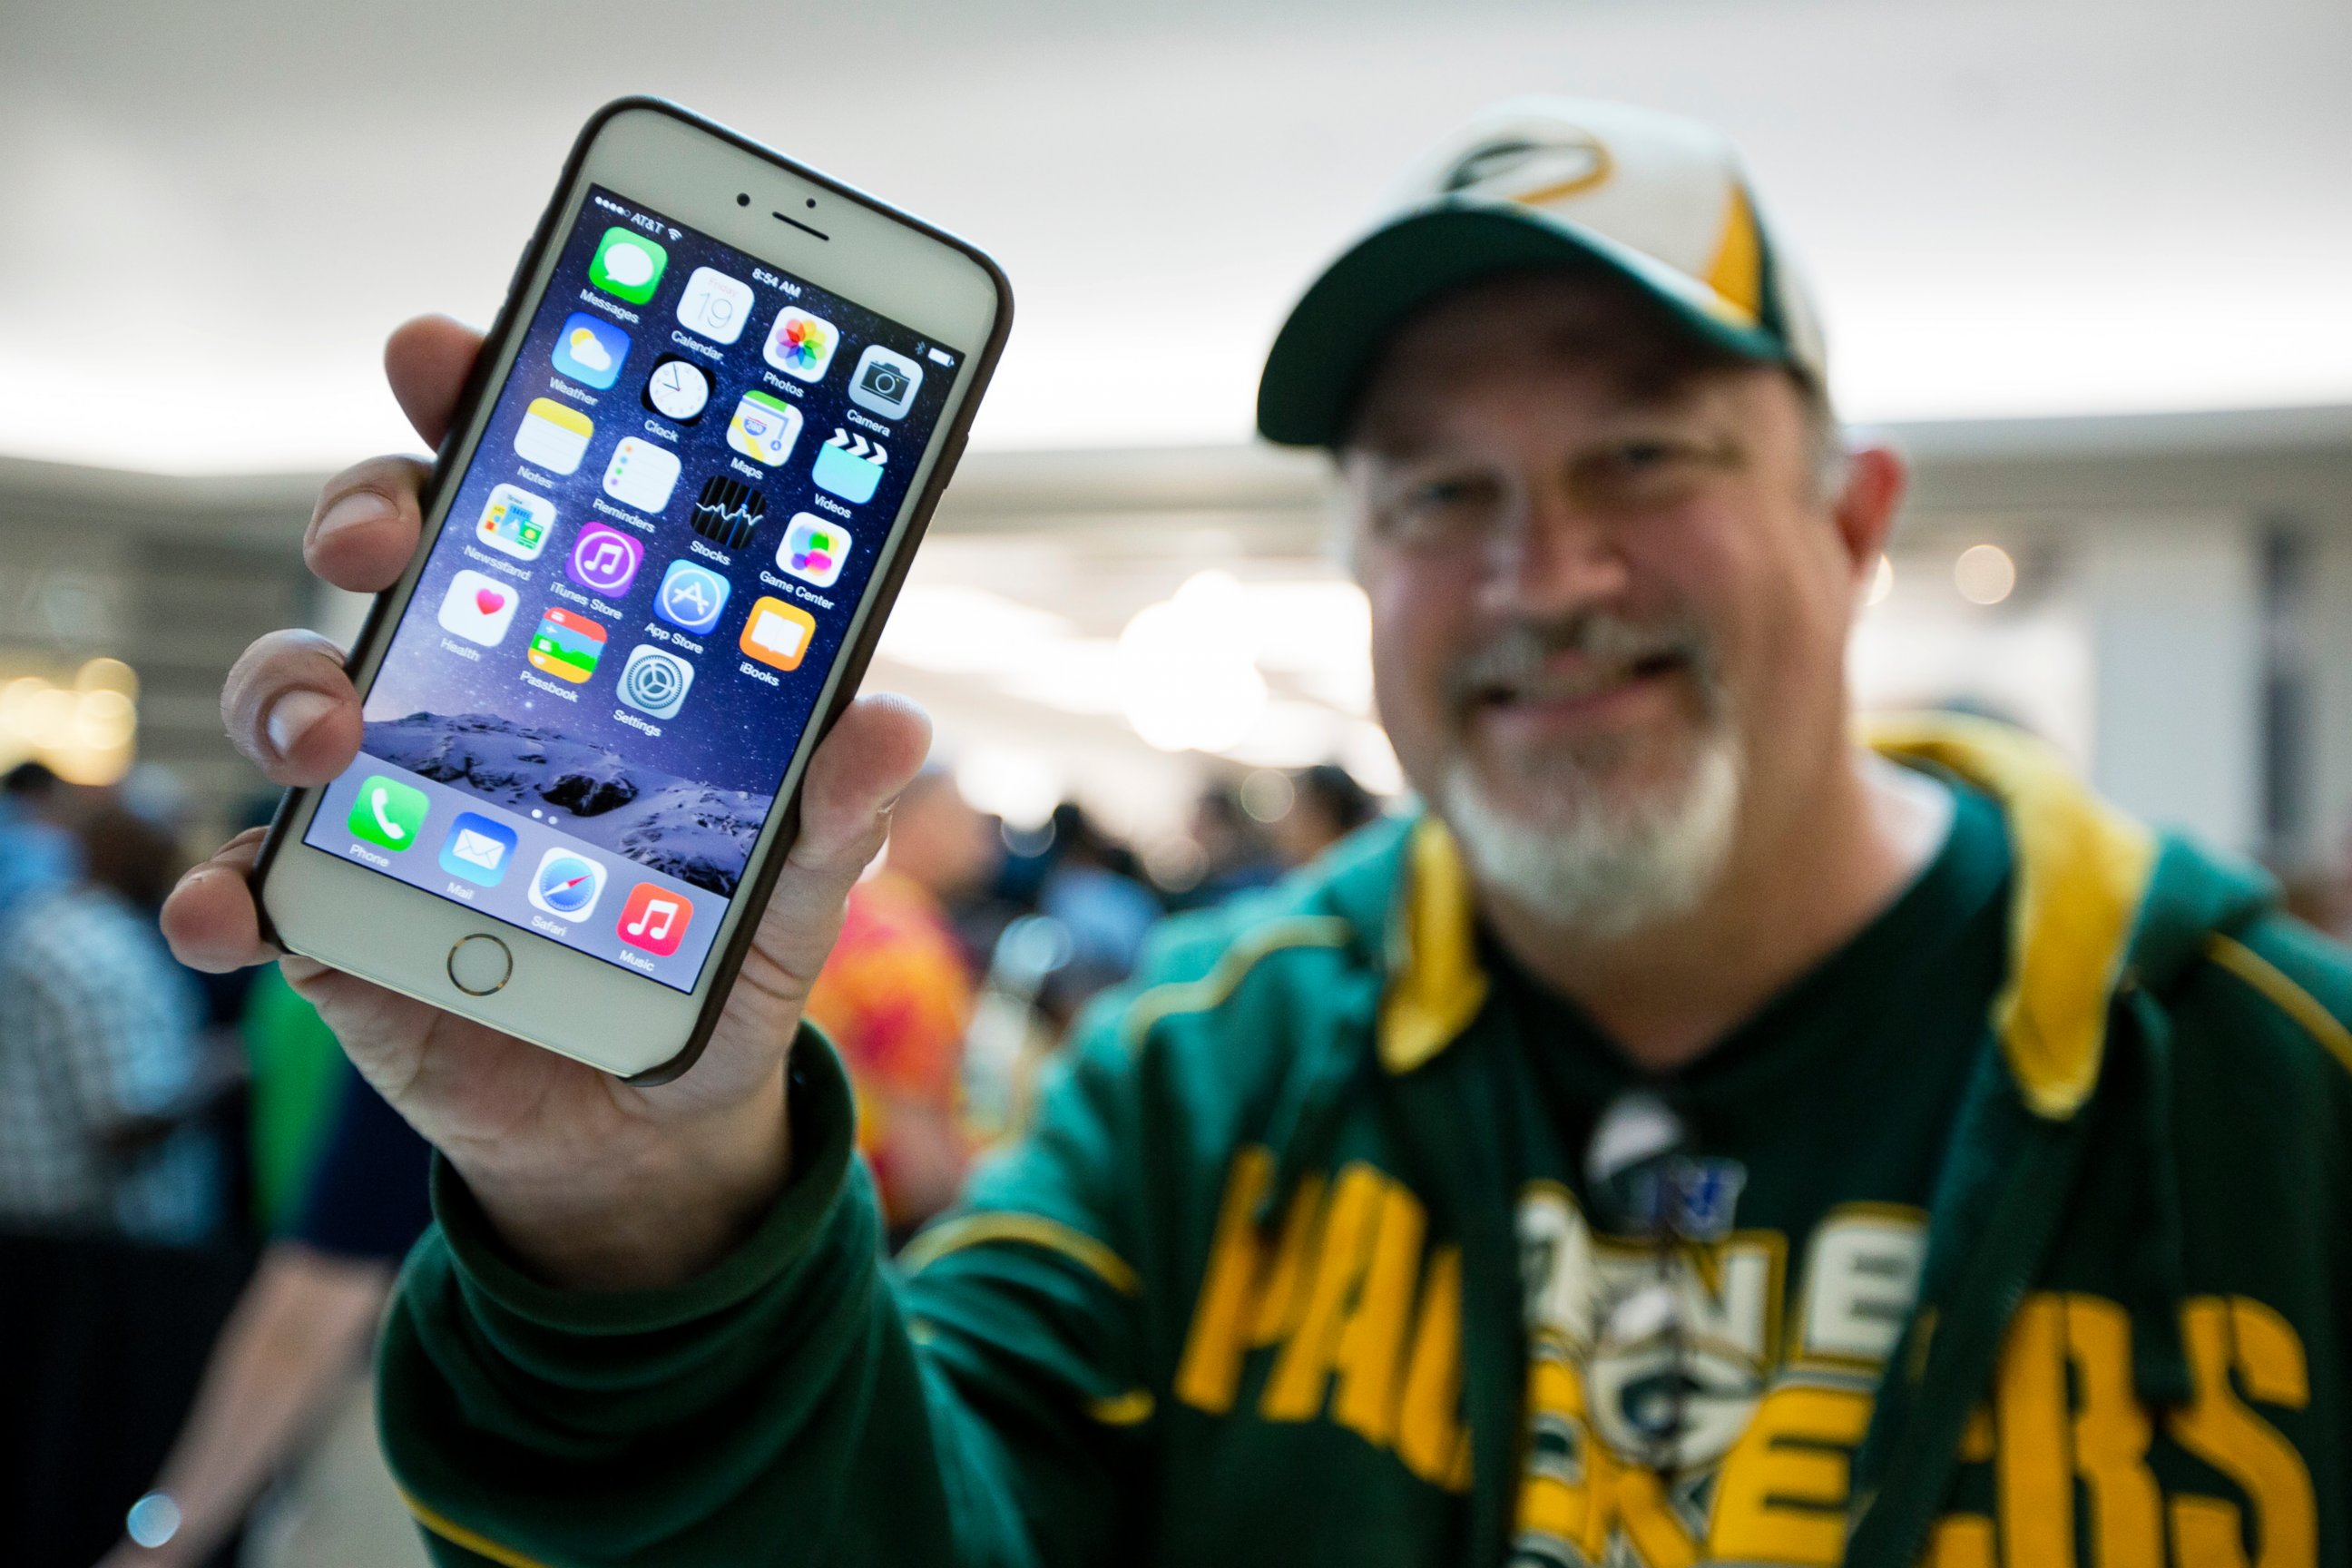 PHOTO: In this Sept. 19, 2014 file photo, John Mihalkovic shows off his newly purchased iPhone 6 Plus outside the Apple store at Lynnhaven Mall in Virginia Beach, Va.